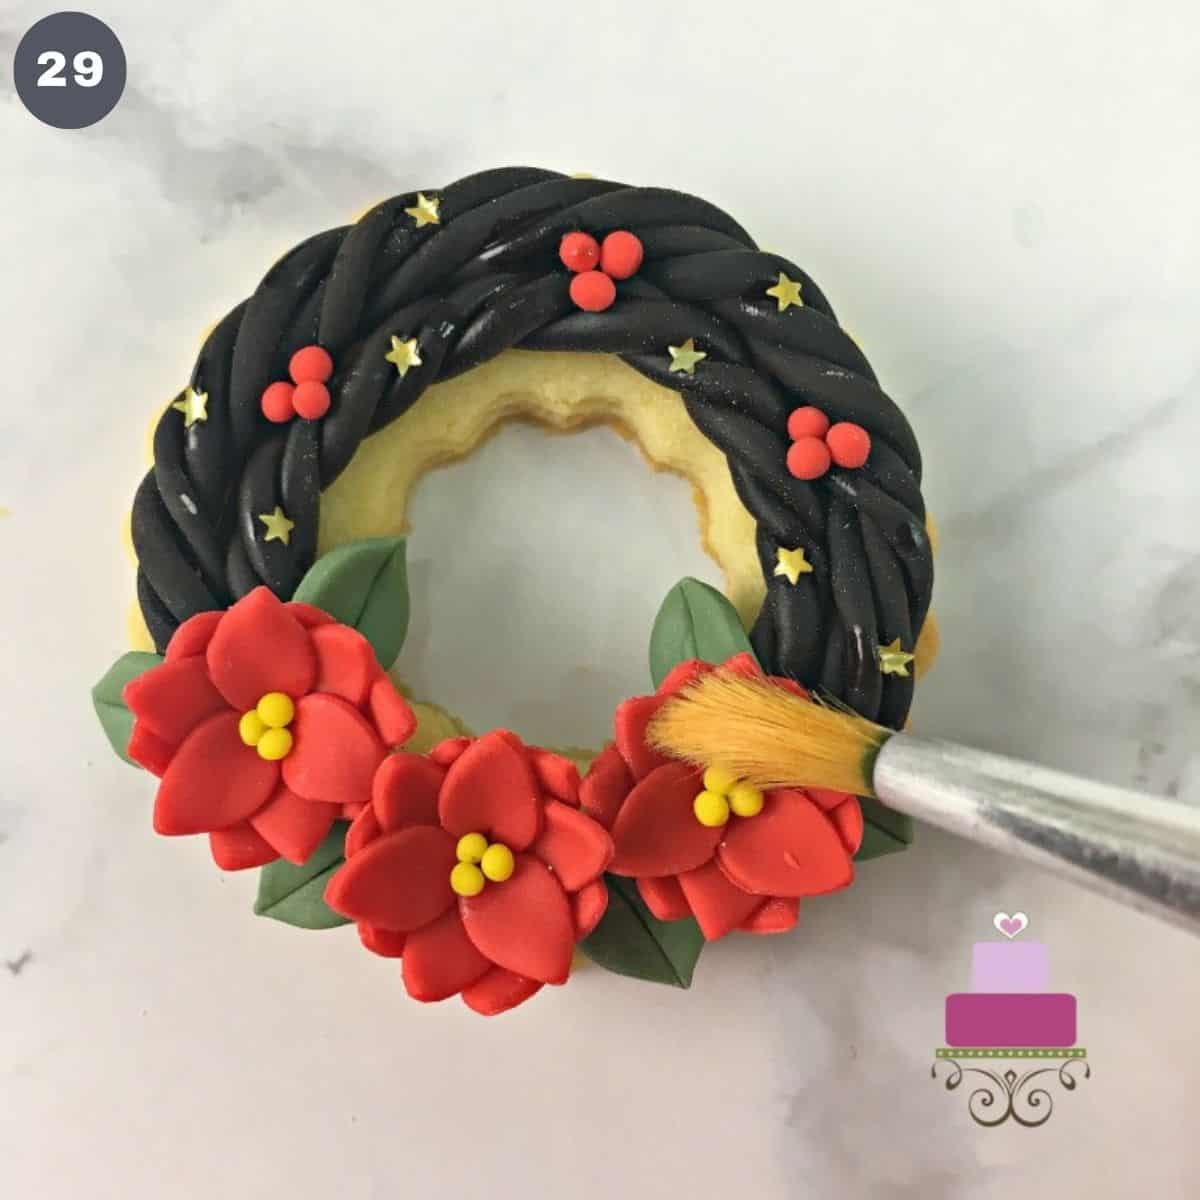 Using a brush to brush to top of a fondant decorated cookie.